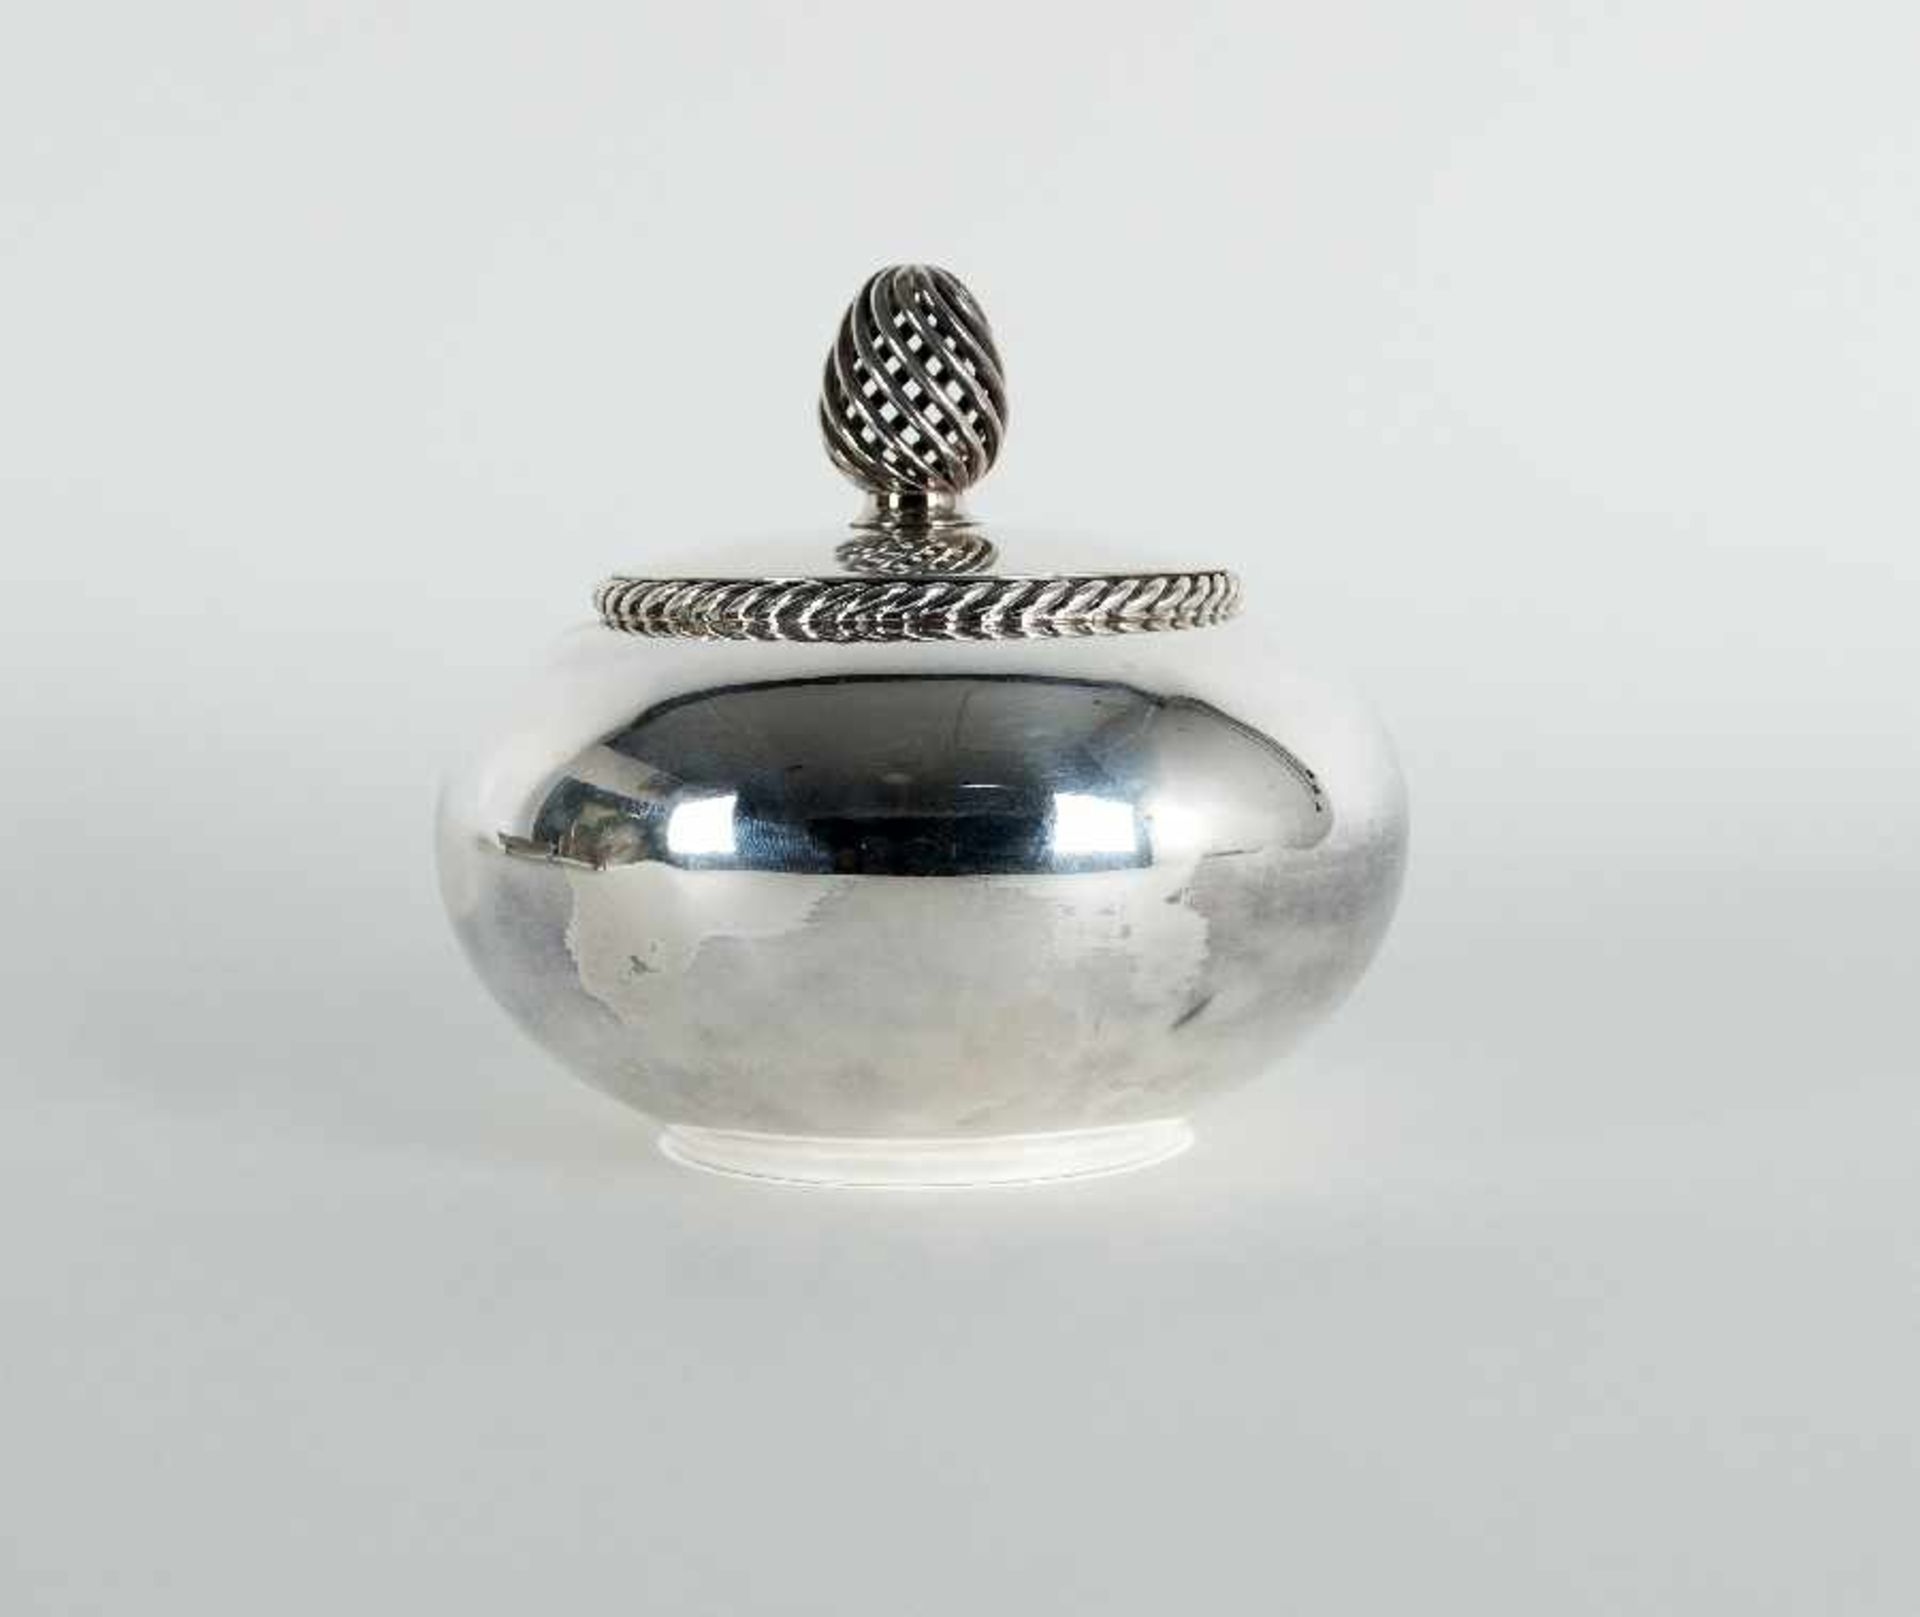 Germany, 1st half of the 20th centuryBox with lidSilver; H 15 cm; hallmarked with crescent and